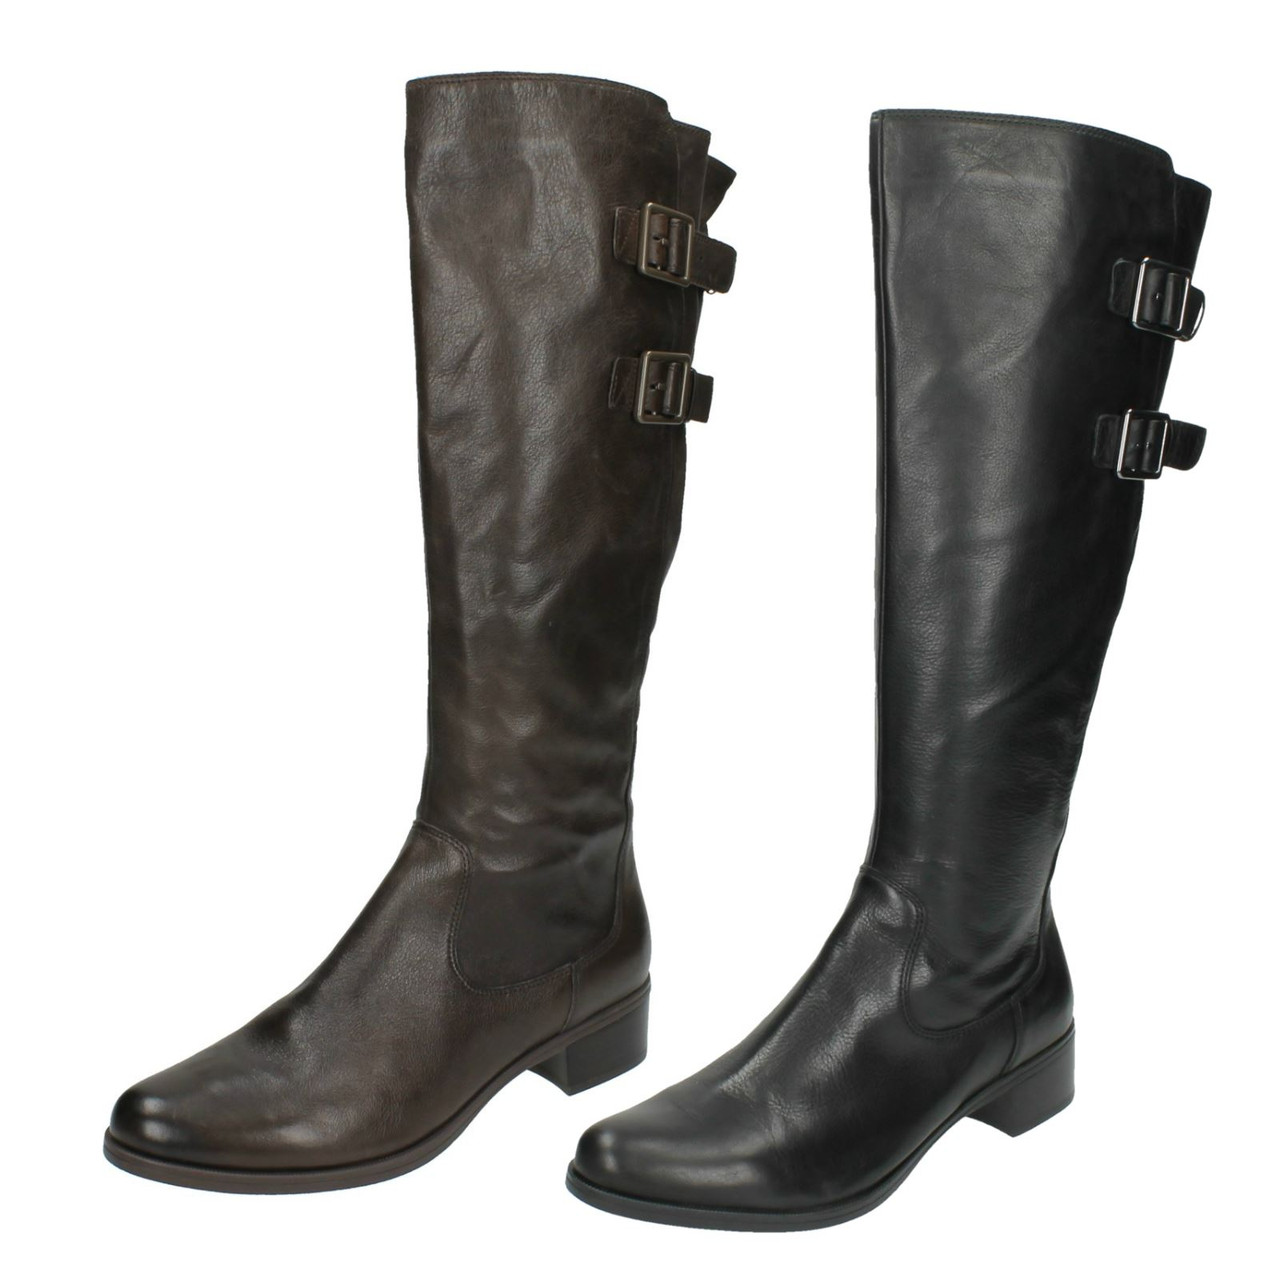 Ladies Clarks Knee High Boots Likeable Me